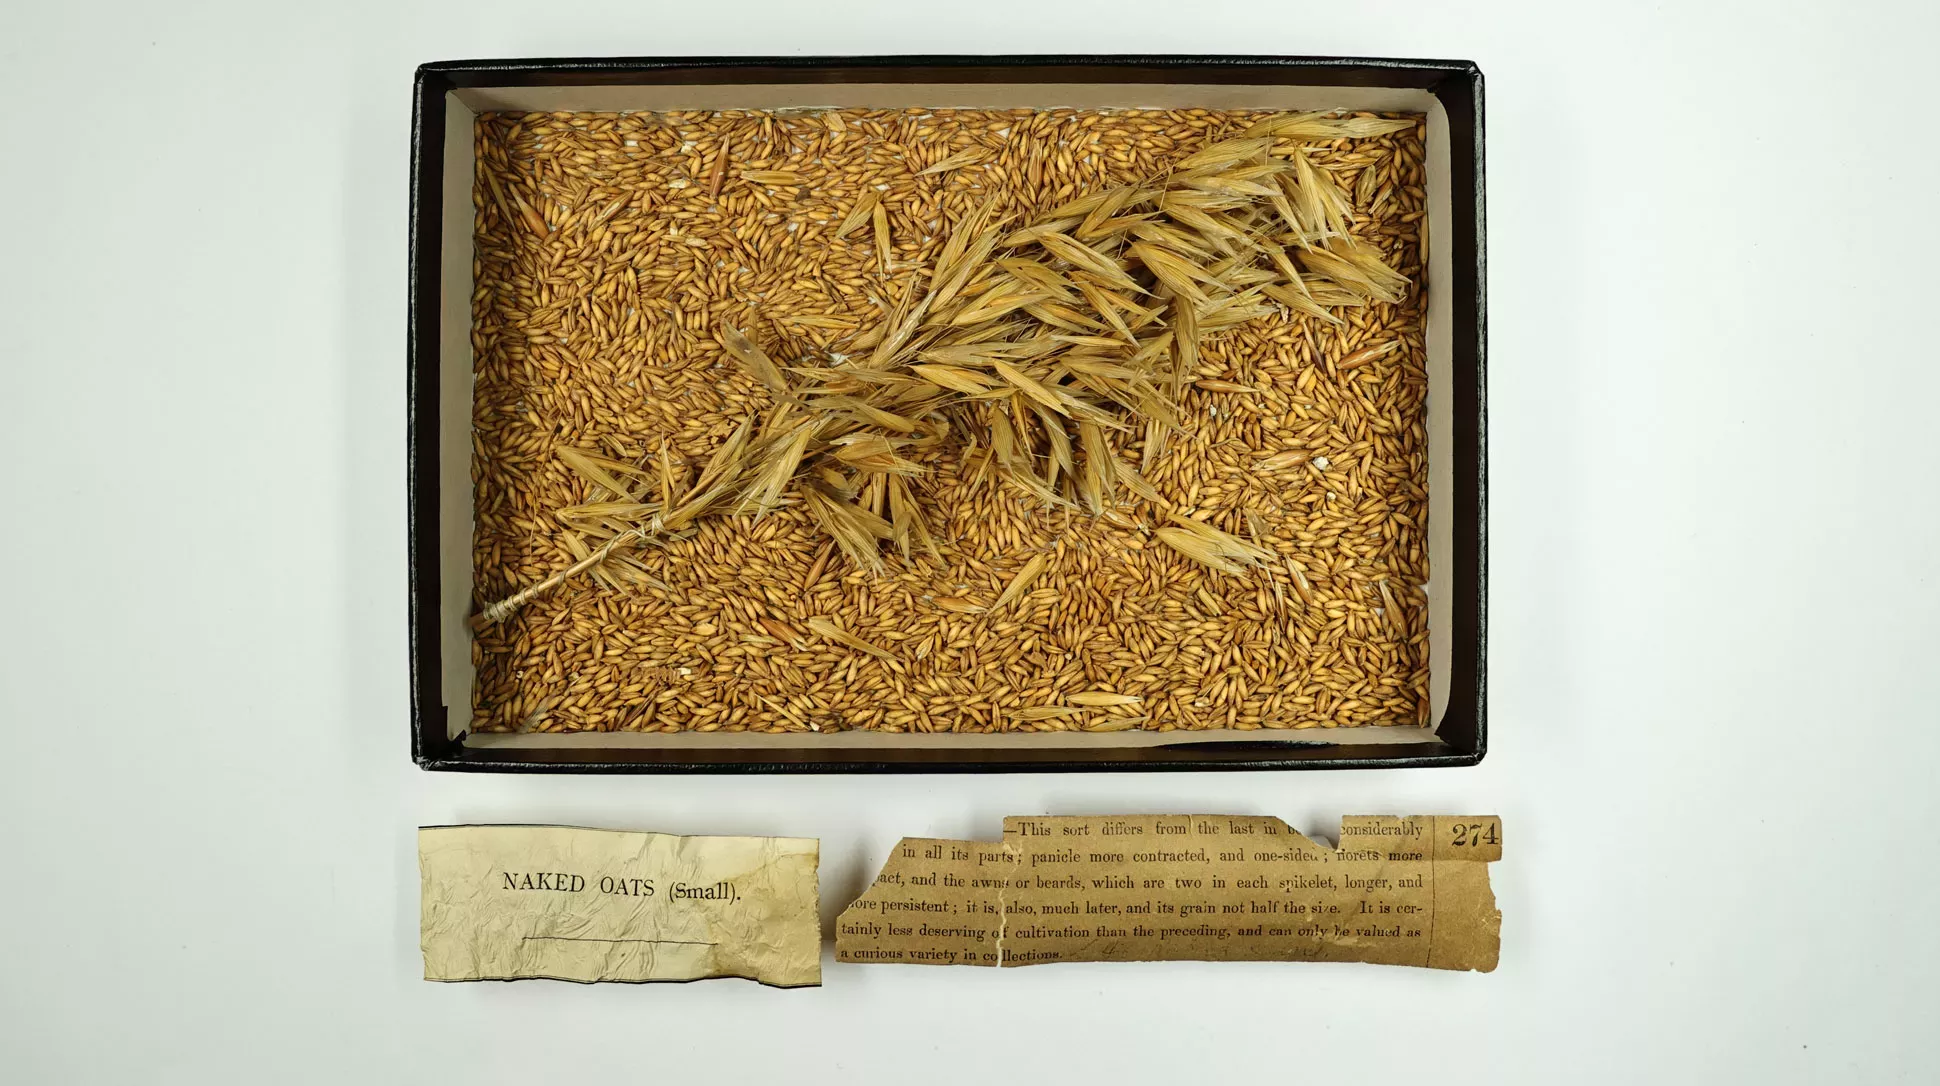 Black box full of dried pillas panicle. Underneath are two bits of scrunched up yellow paper. One reads Naked oats (small). The second paper has a description of the plant and grains but the paper is ripped so there are no complete sentences.